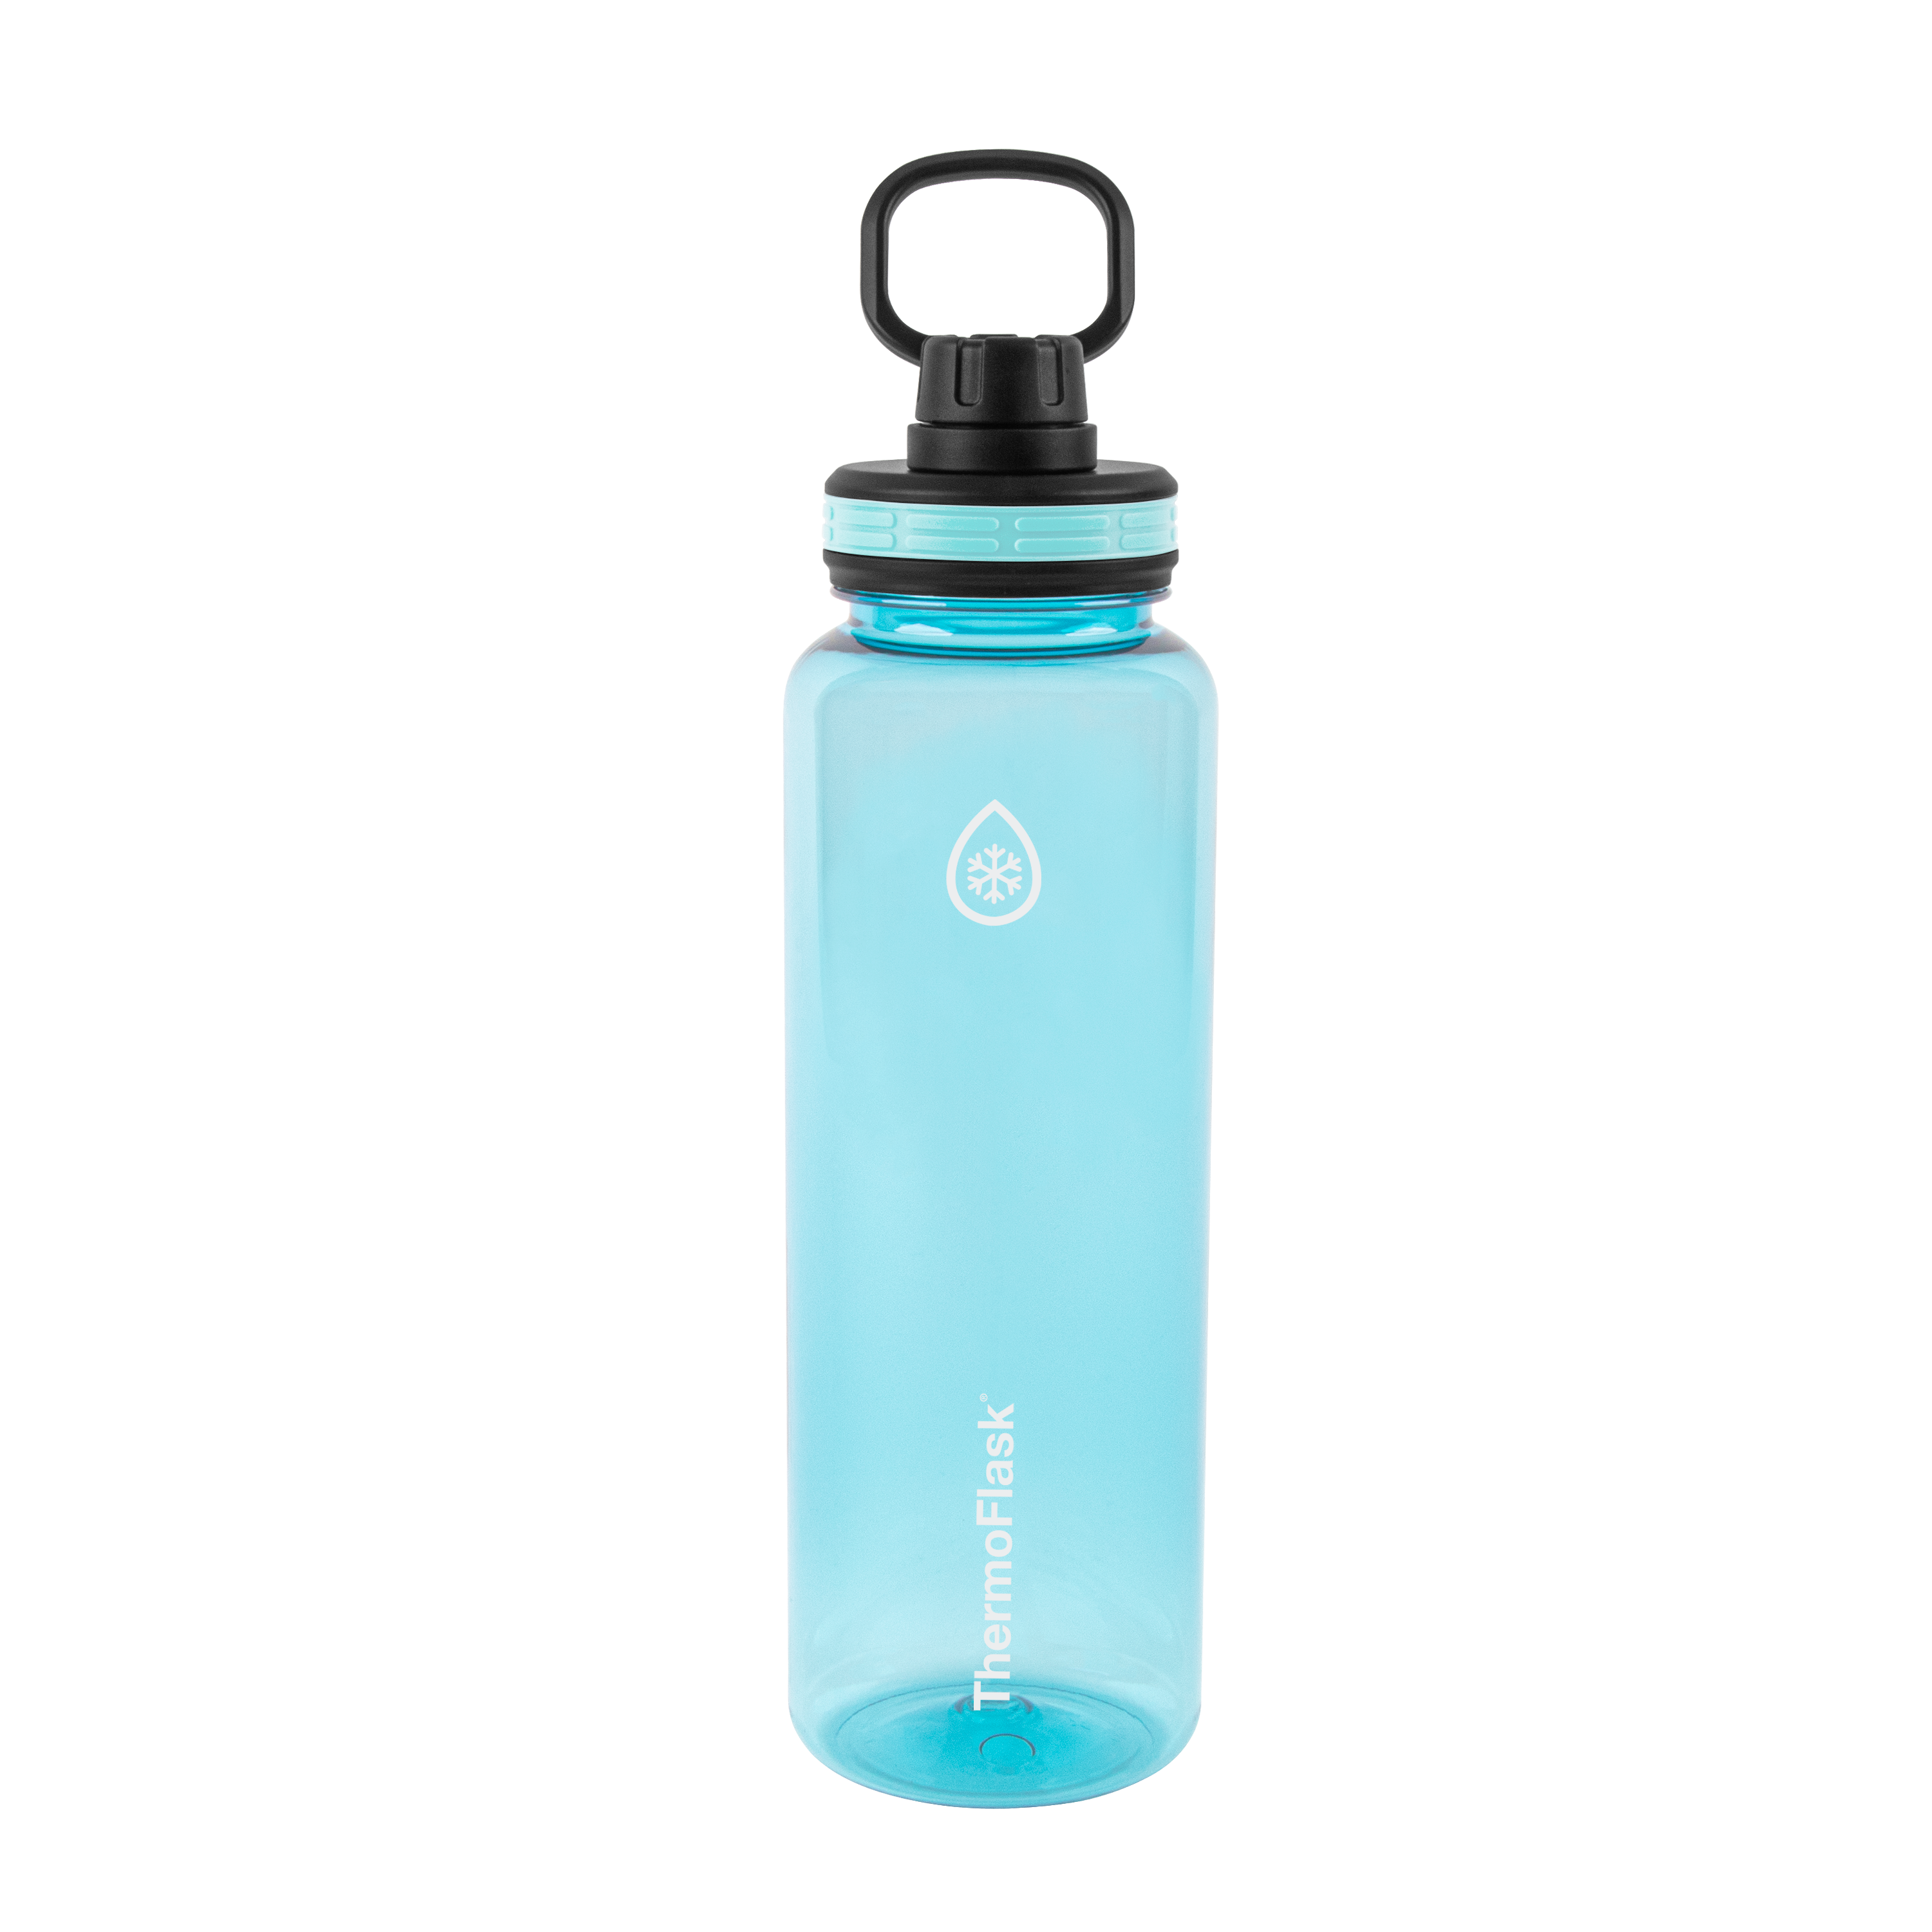 5 Safe, No-Leak, Easy-to-Clean Water Bottles for Big Kids (yes